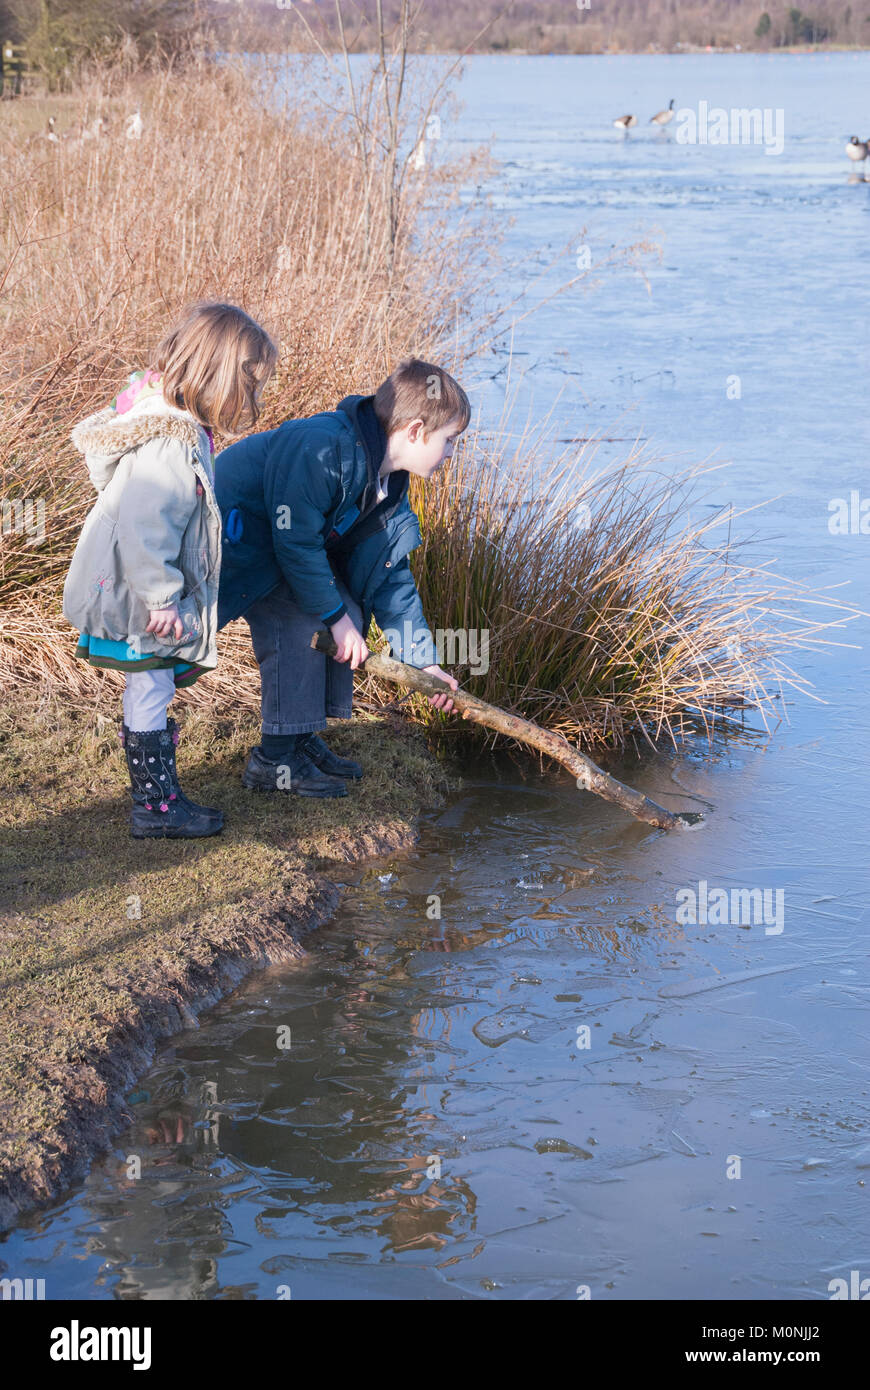 Sheffield, UK- 08 Feb: Children play, smashing the ice on the frozen lake on 08 Feb 2015 at Rother Valley Country Park Stock Photo